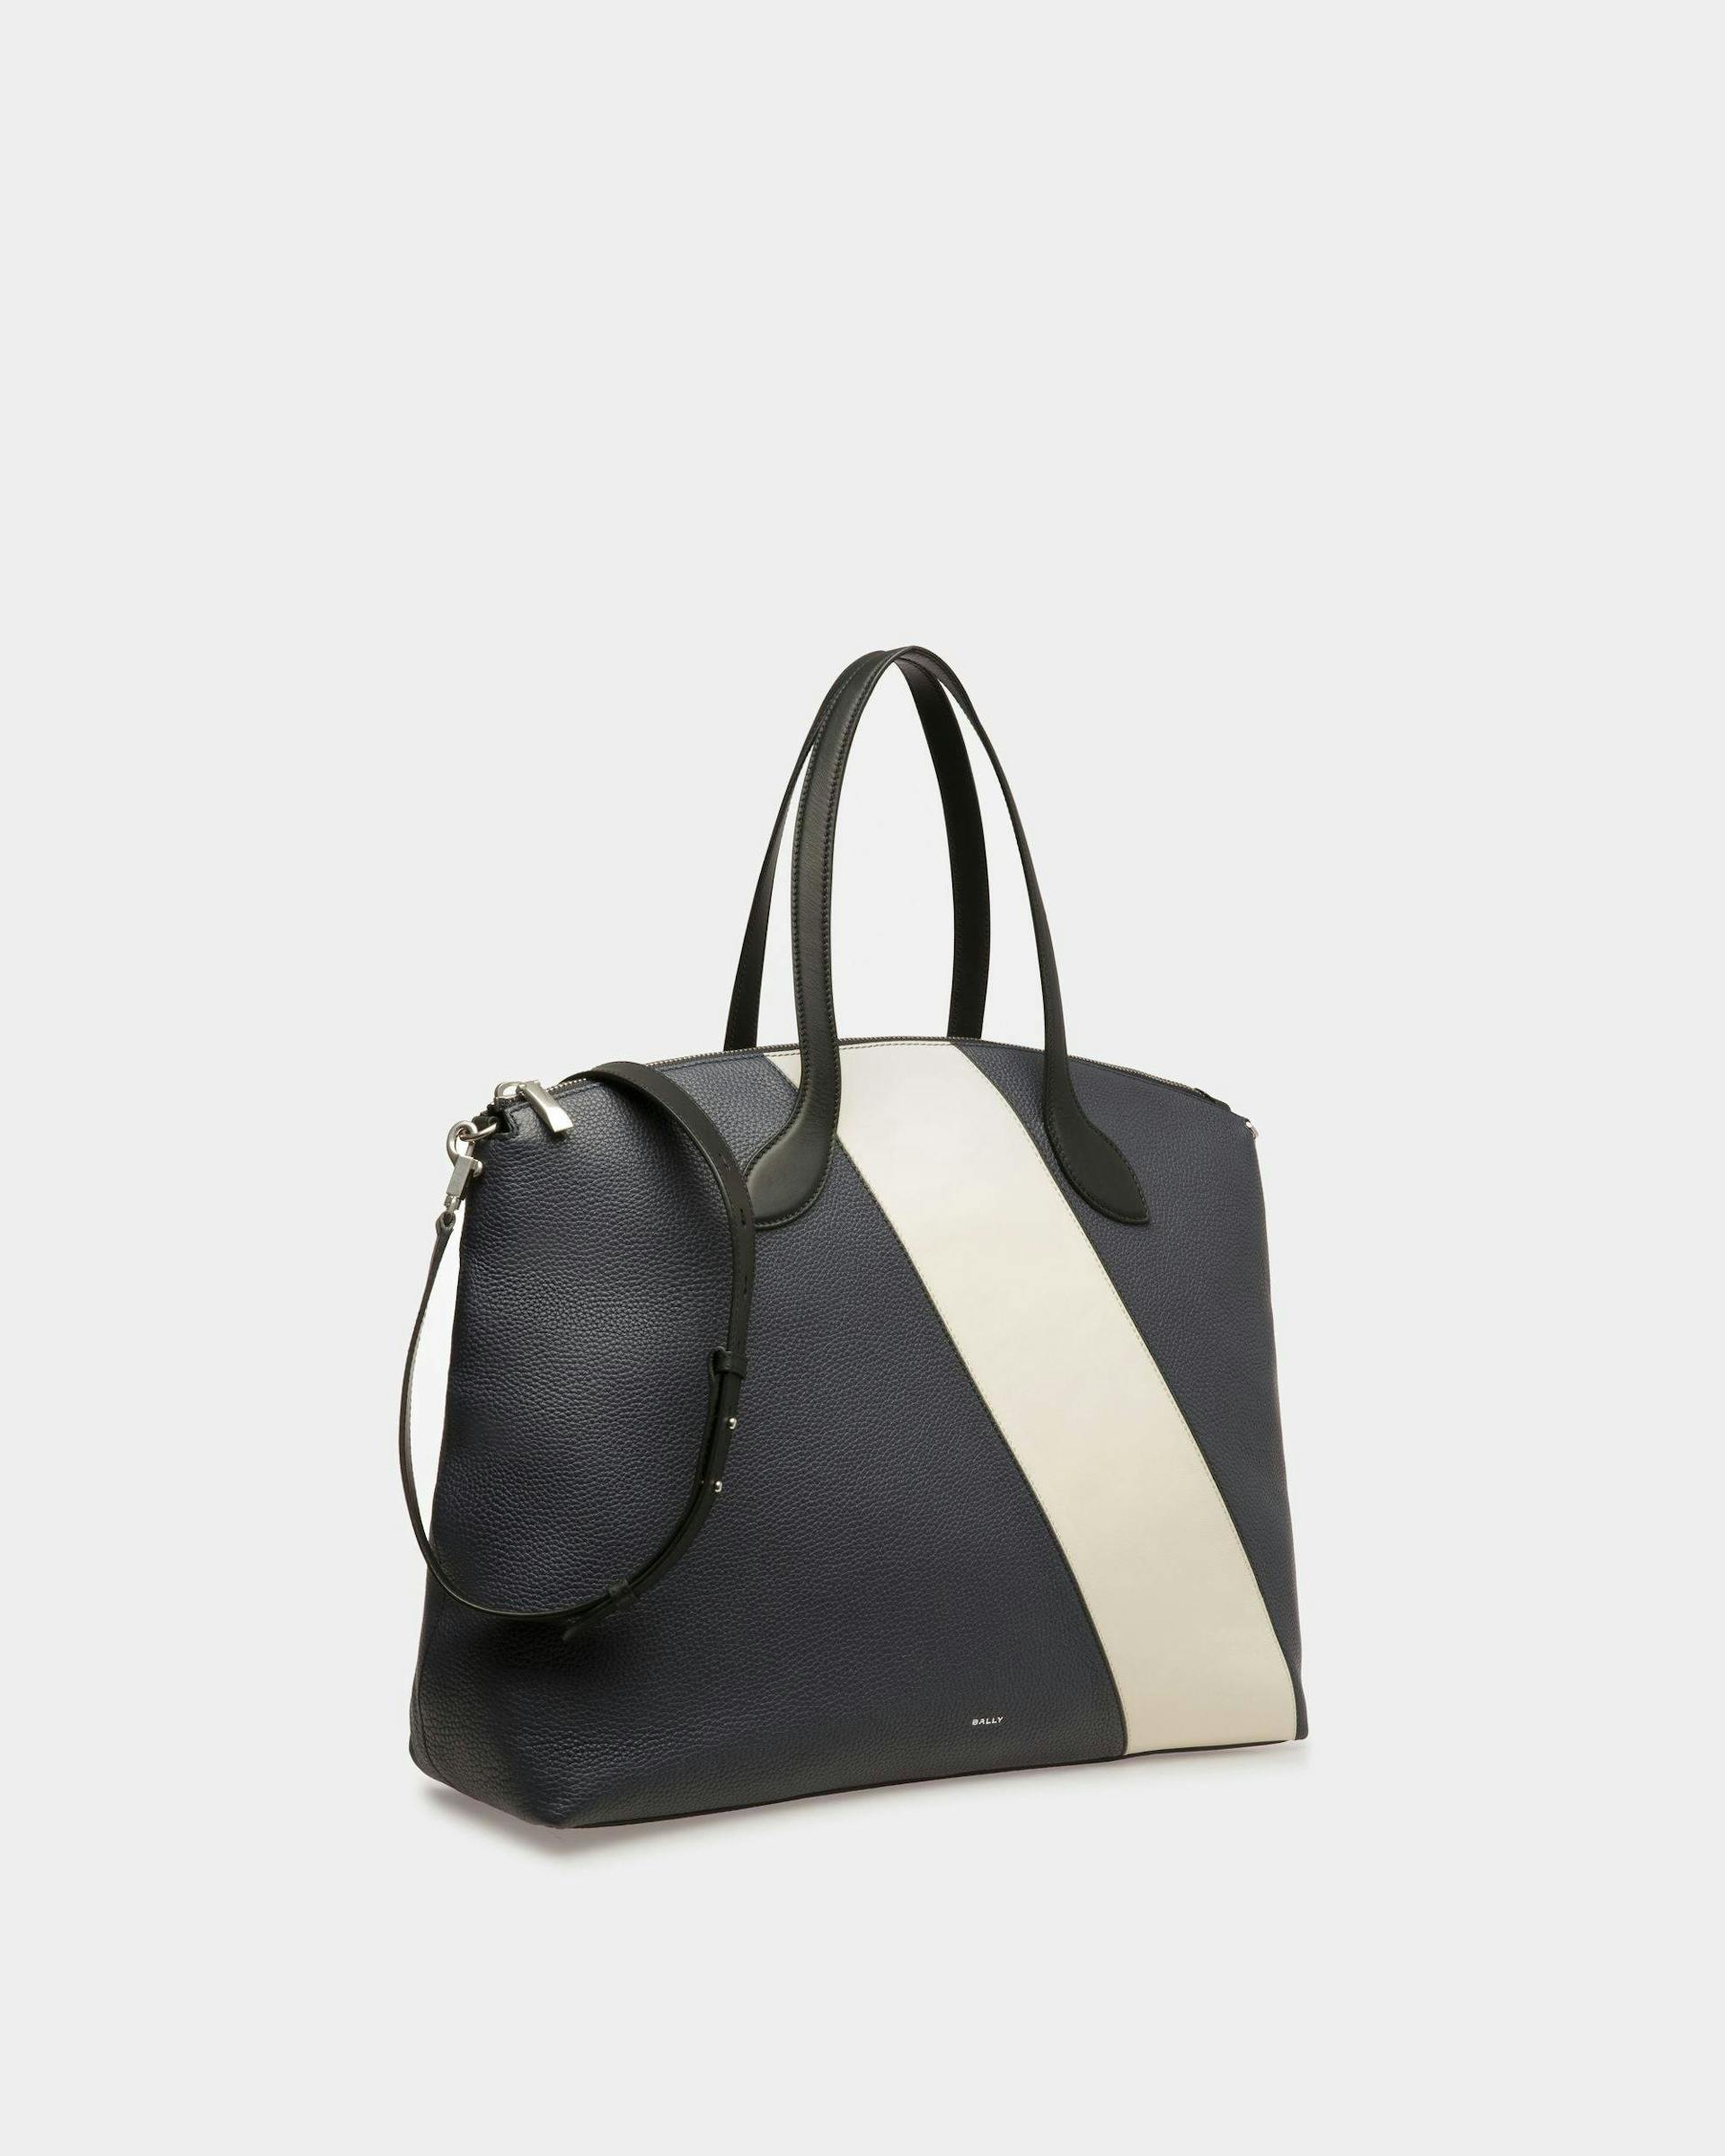 Men's Lago Tote Bag In Midnight Leather | Bally | Still Life 3/4 Front